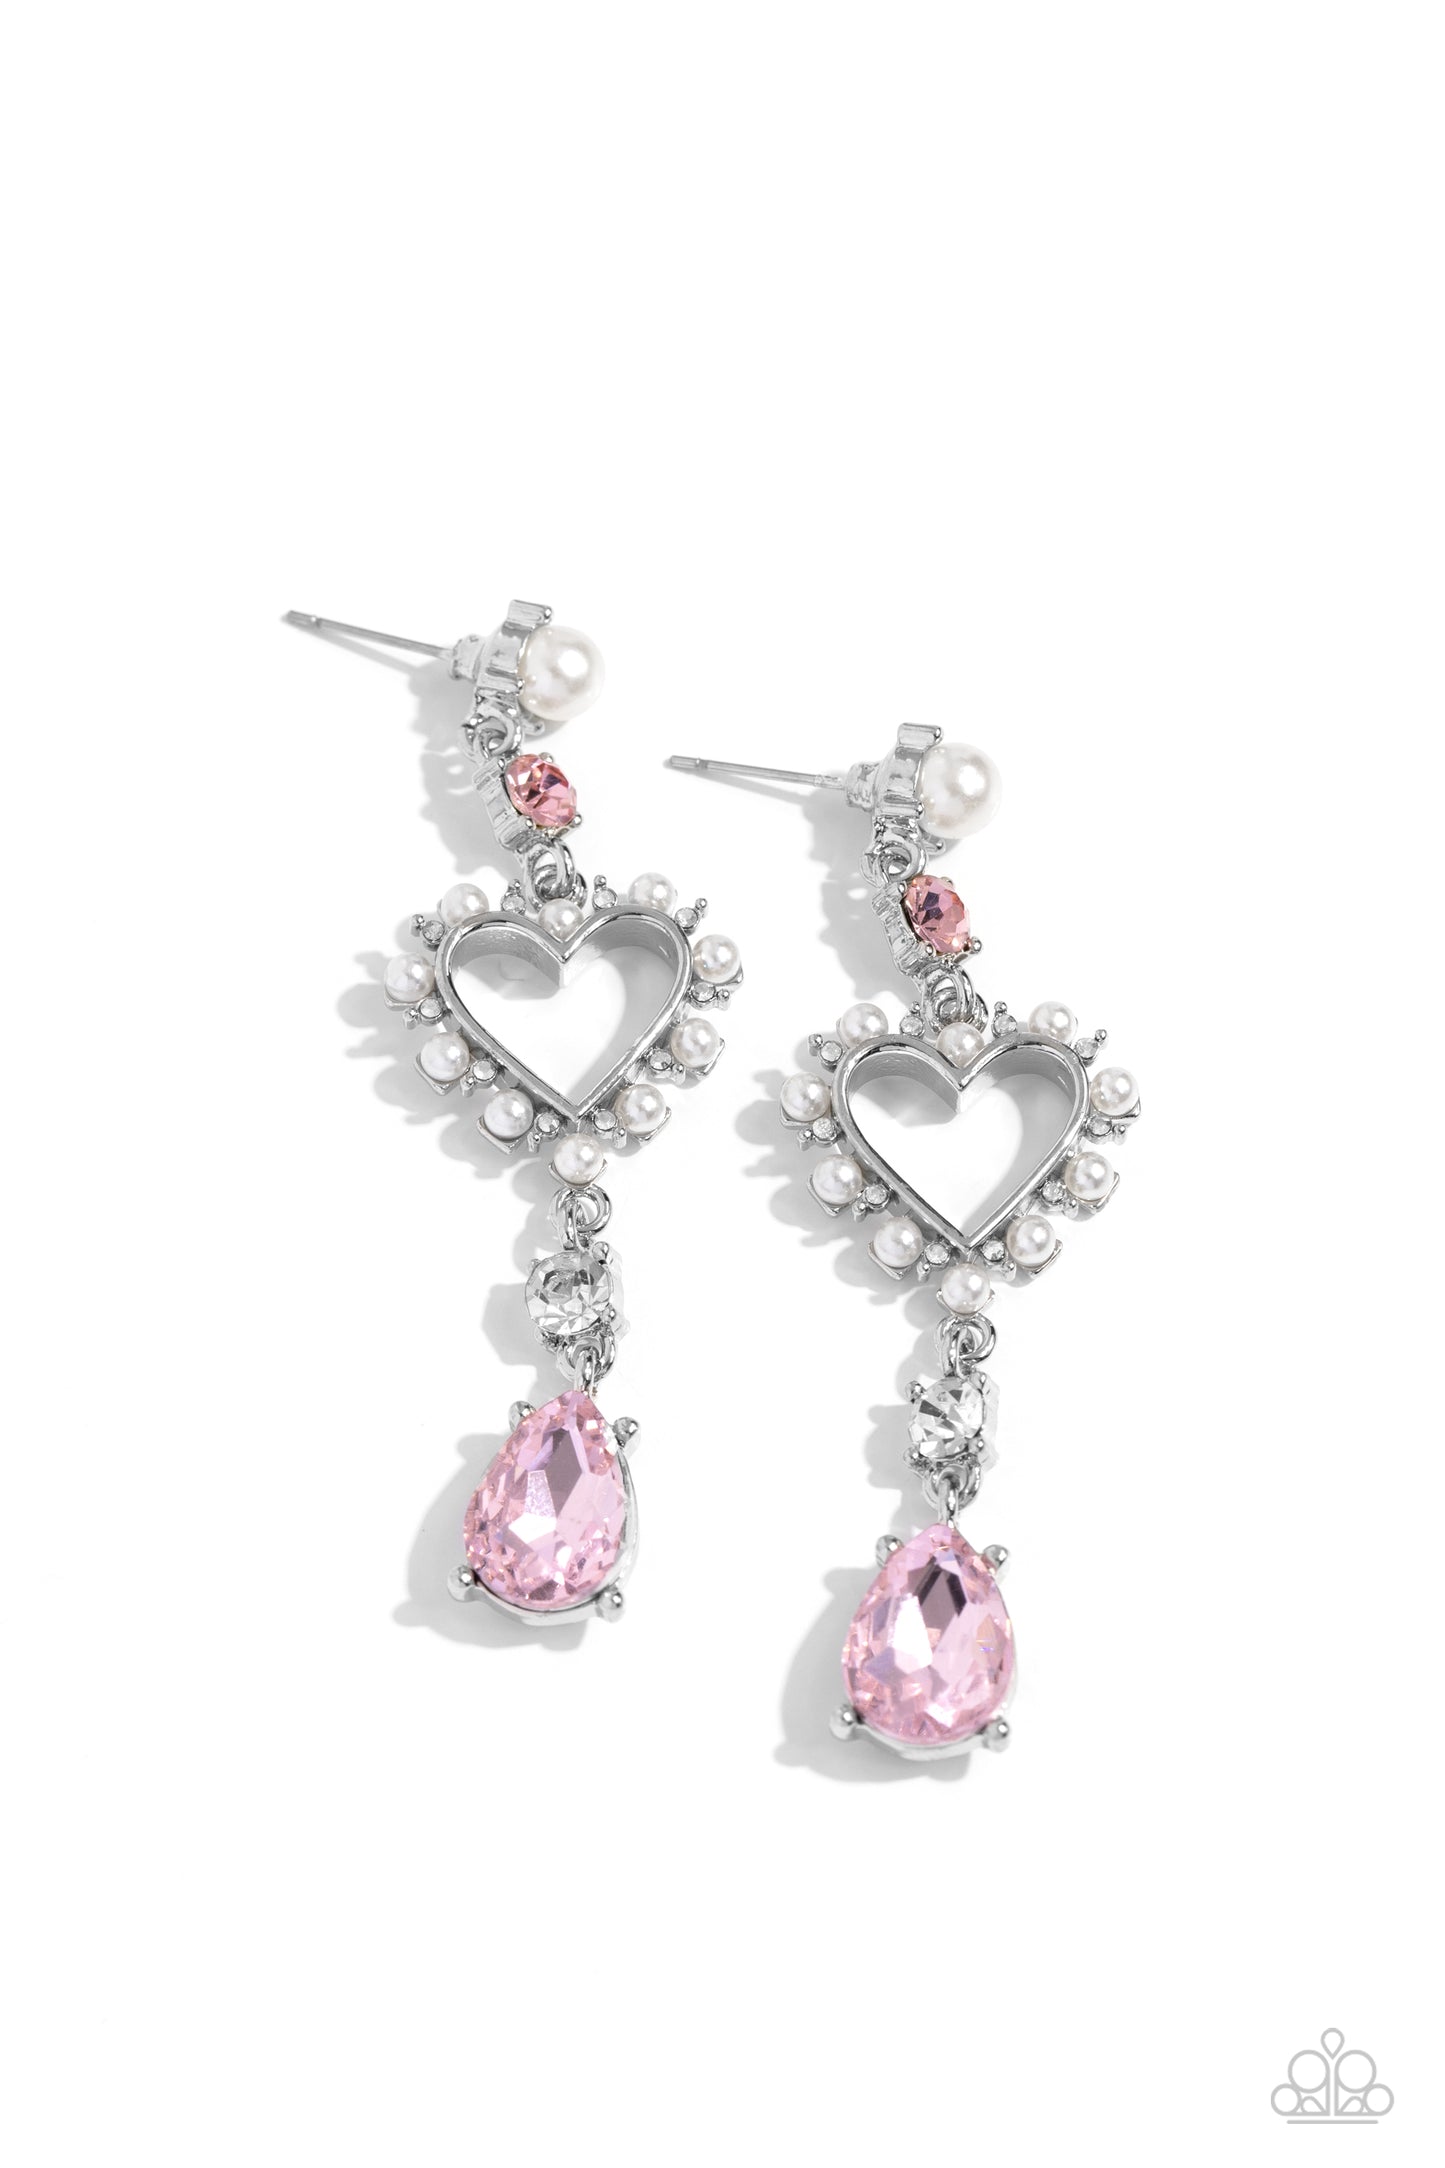 Paparazzi Accessories - Lovers Lure - Pink Heart Earringsaa white pearl and pink gem are pronged in silver fittings as they give way to an airy heart frame embellished with dainty white pearls and iridescent rhinestones for a dreamy finish. A white gem and pink teardrop gem, pressed in the same pronged fittings, dramatically swing from the bottom of the airy heart frame, capturing and reflecting light at every hypnotic sway. Earring attaches to a standard post fitting.